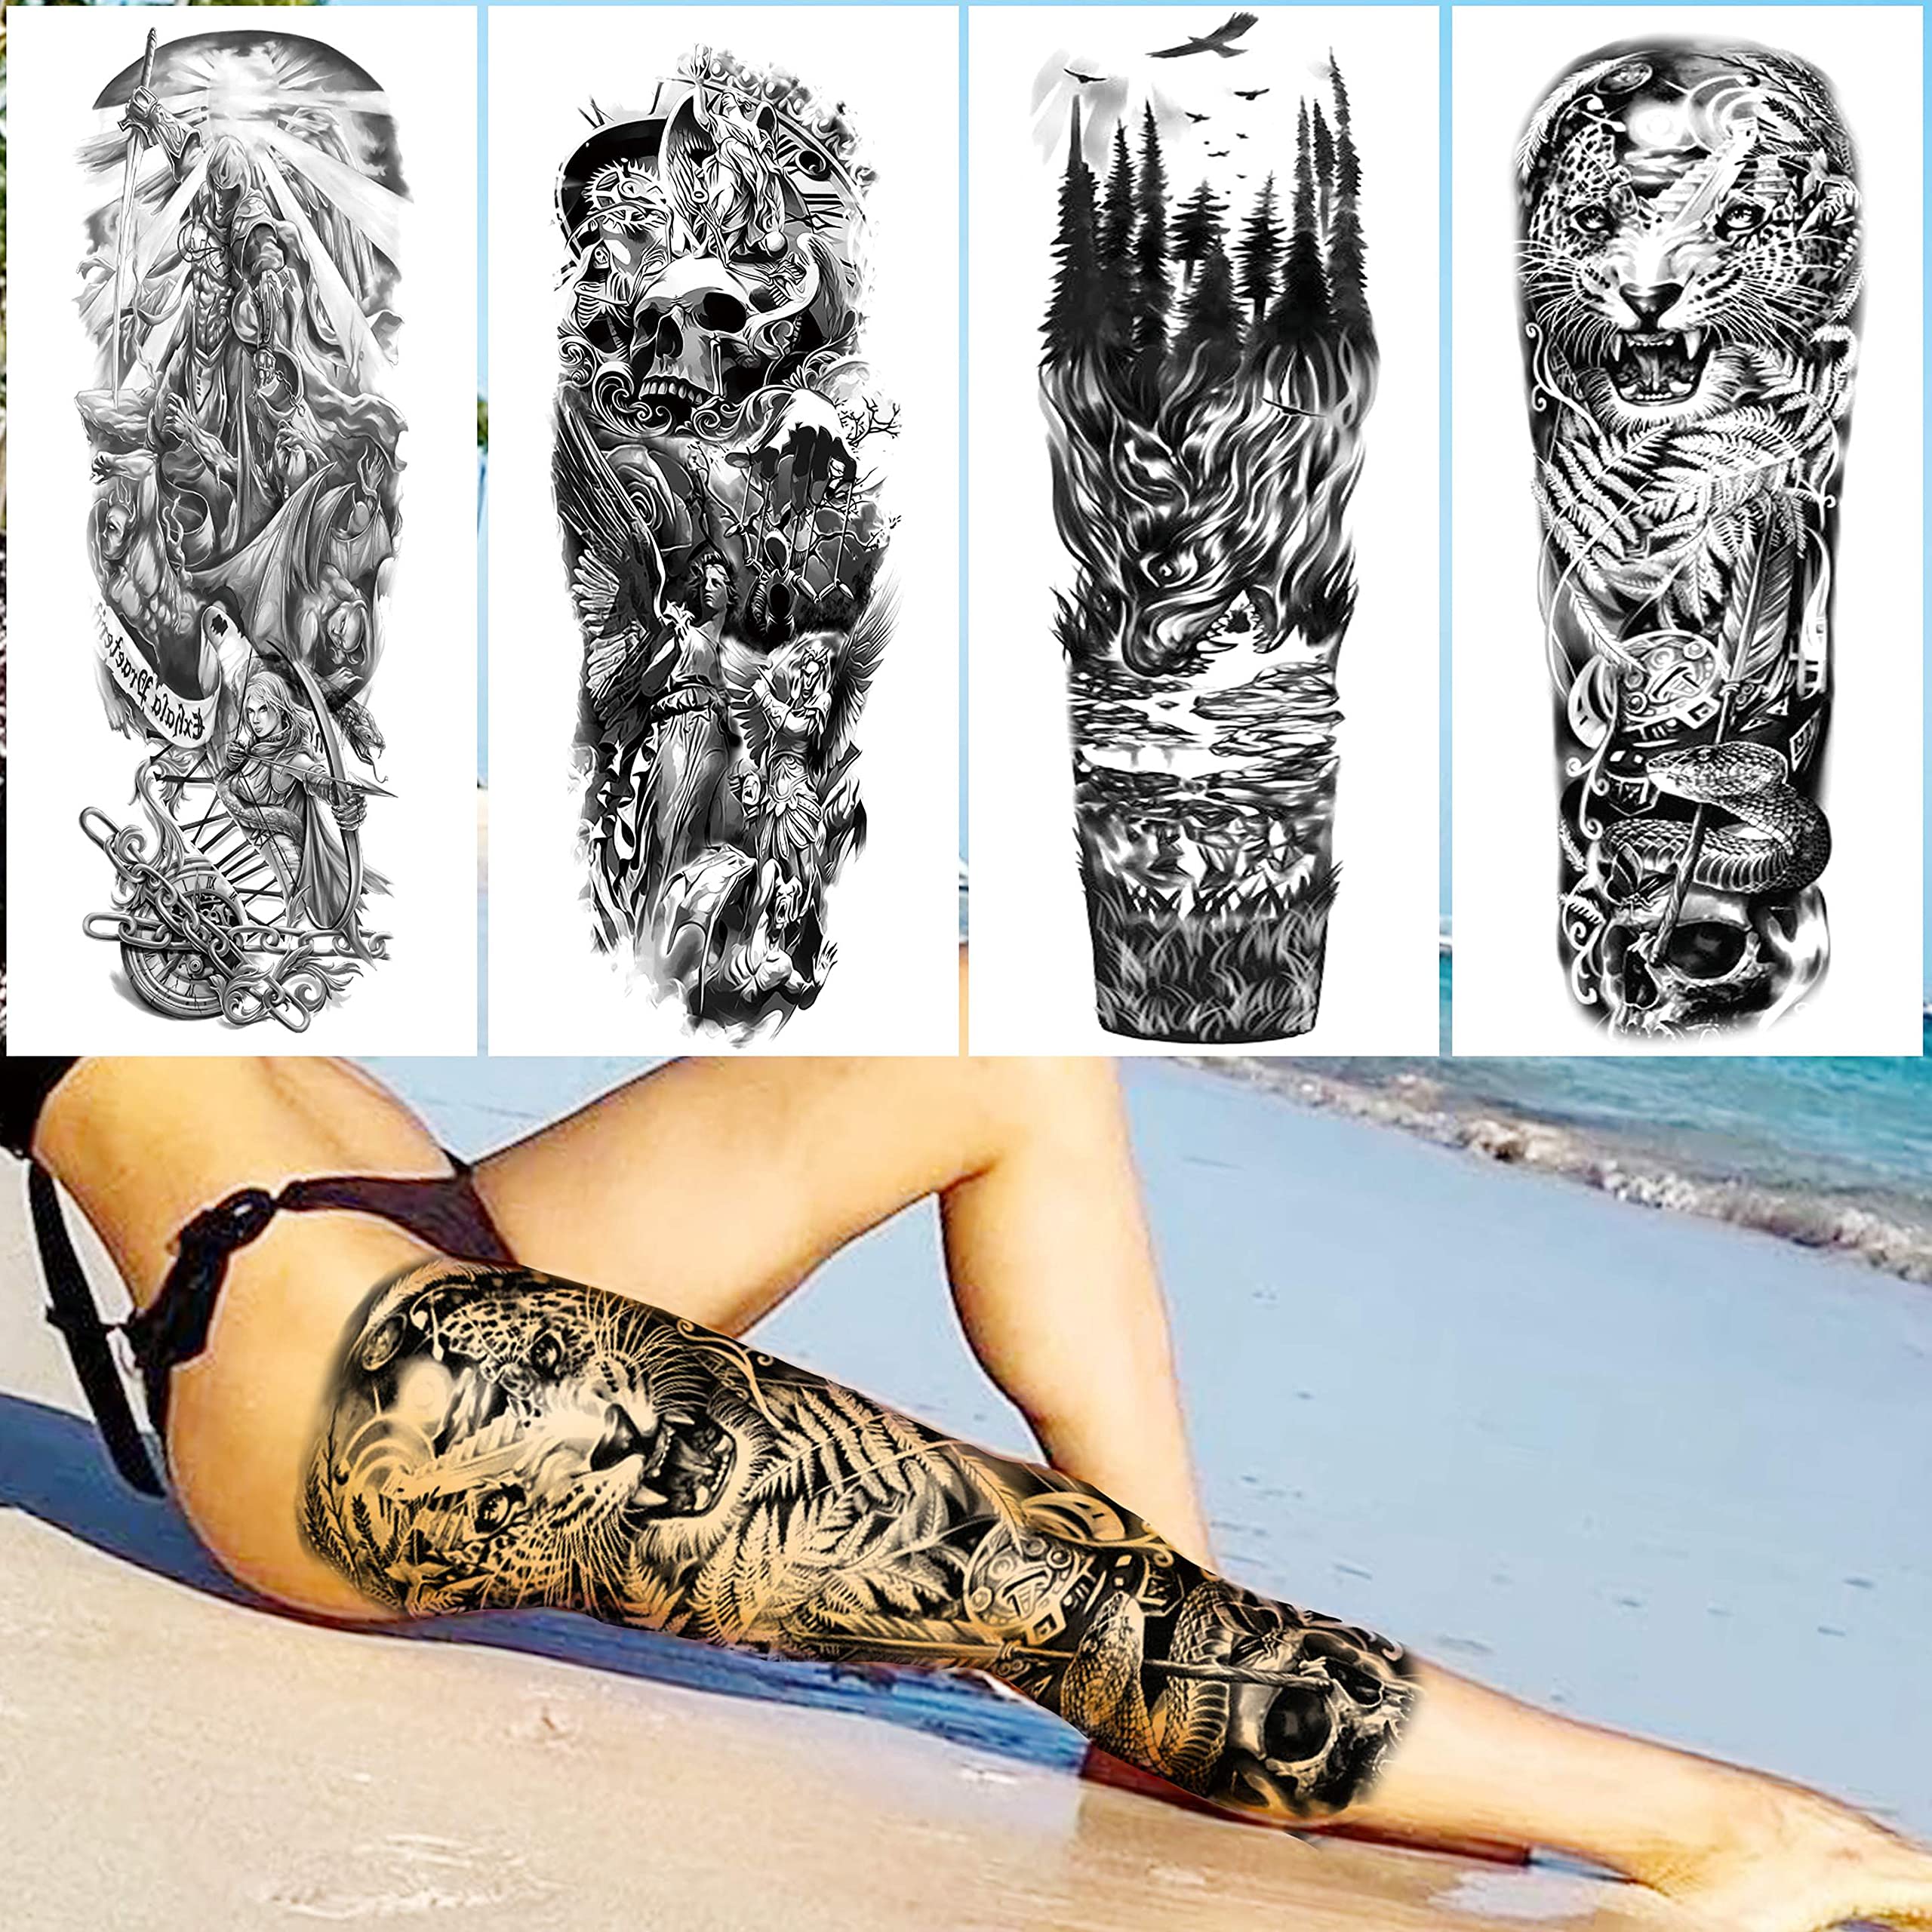 VANTATY 20 Sheets Extra Large Full Arm Temporary Tattoos For Men Adults, Tiger Snake Leopard Lion King Temporary Tattoos Sleeve For Women, Temp Waterproof Fake Tattoo Stickers For Kids Warrior Tatoos